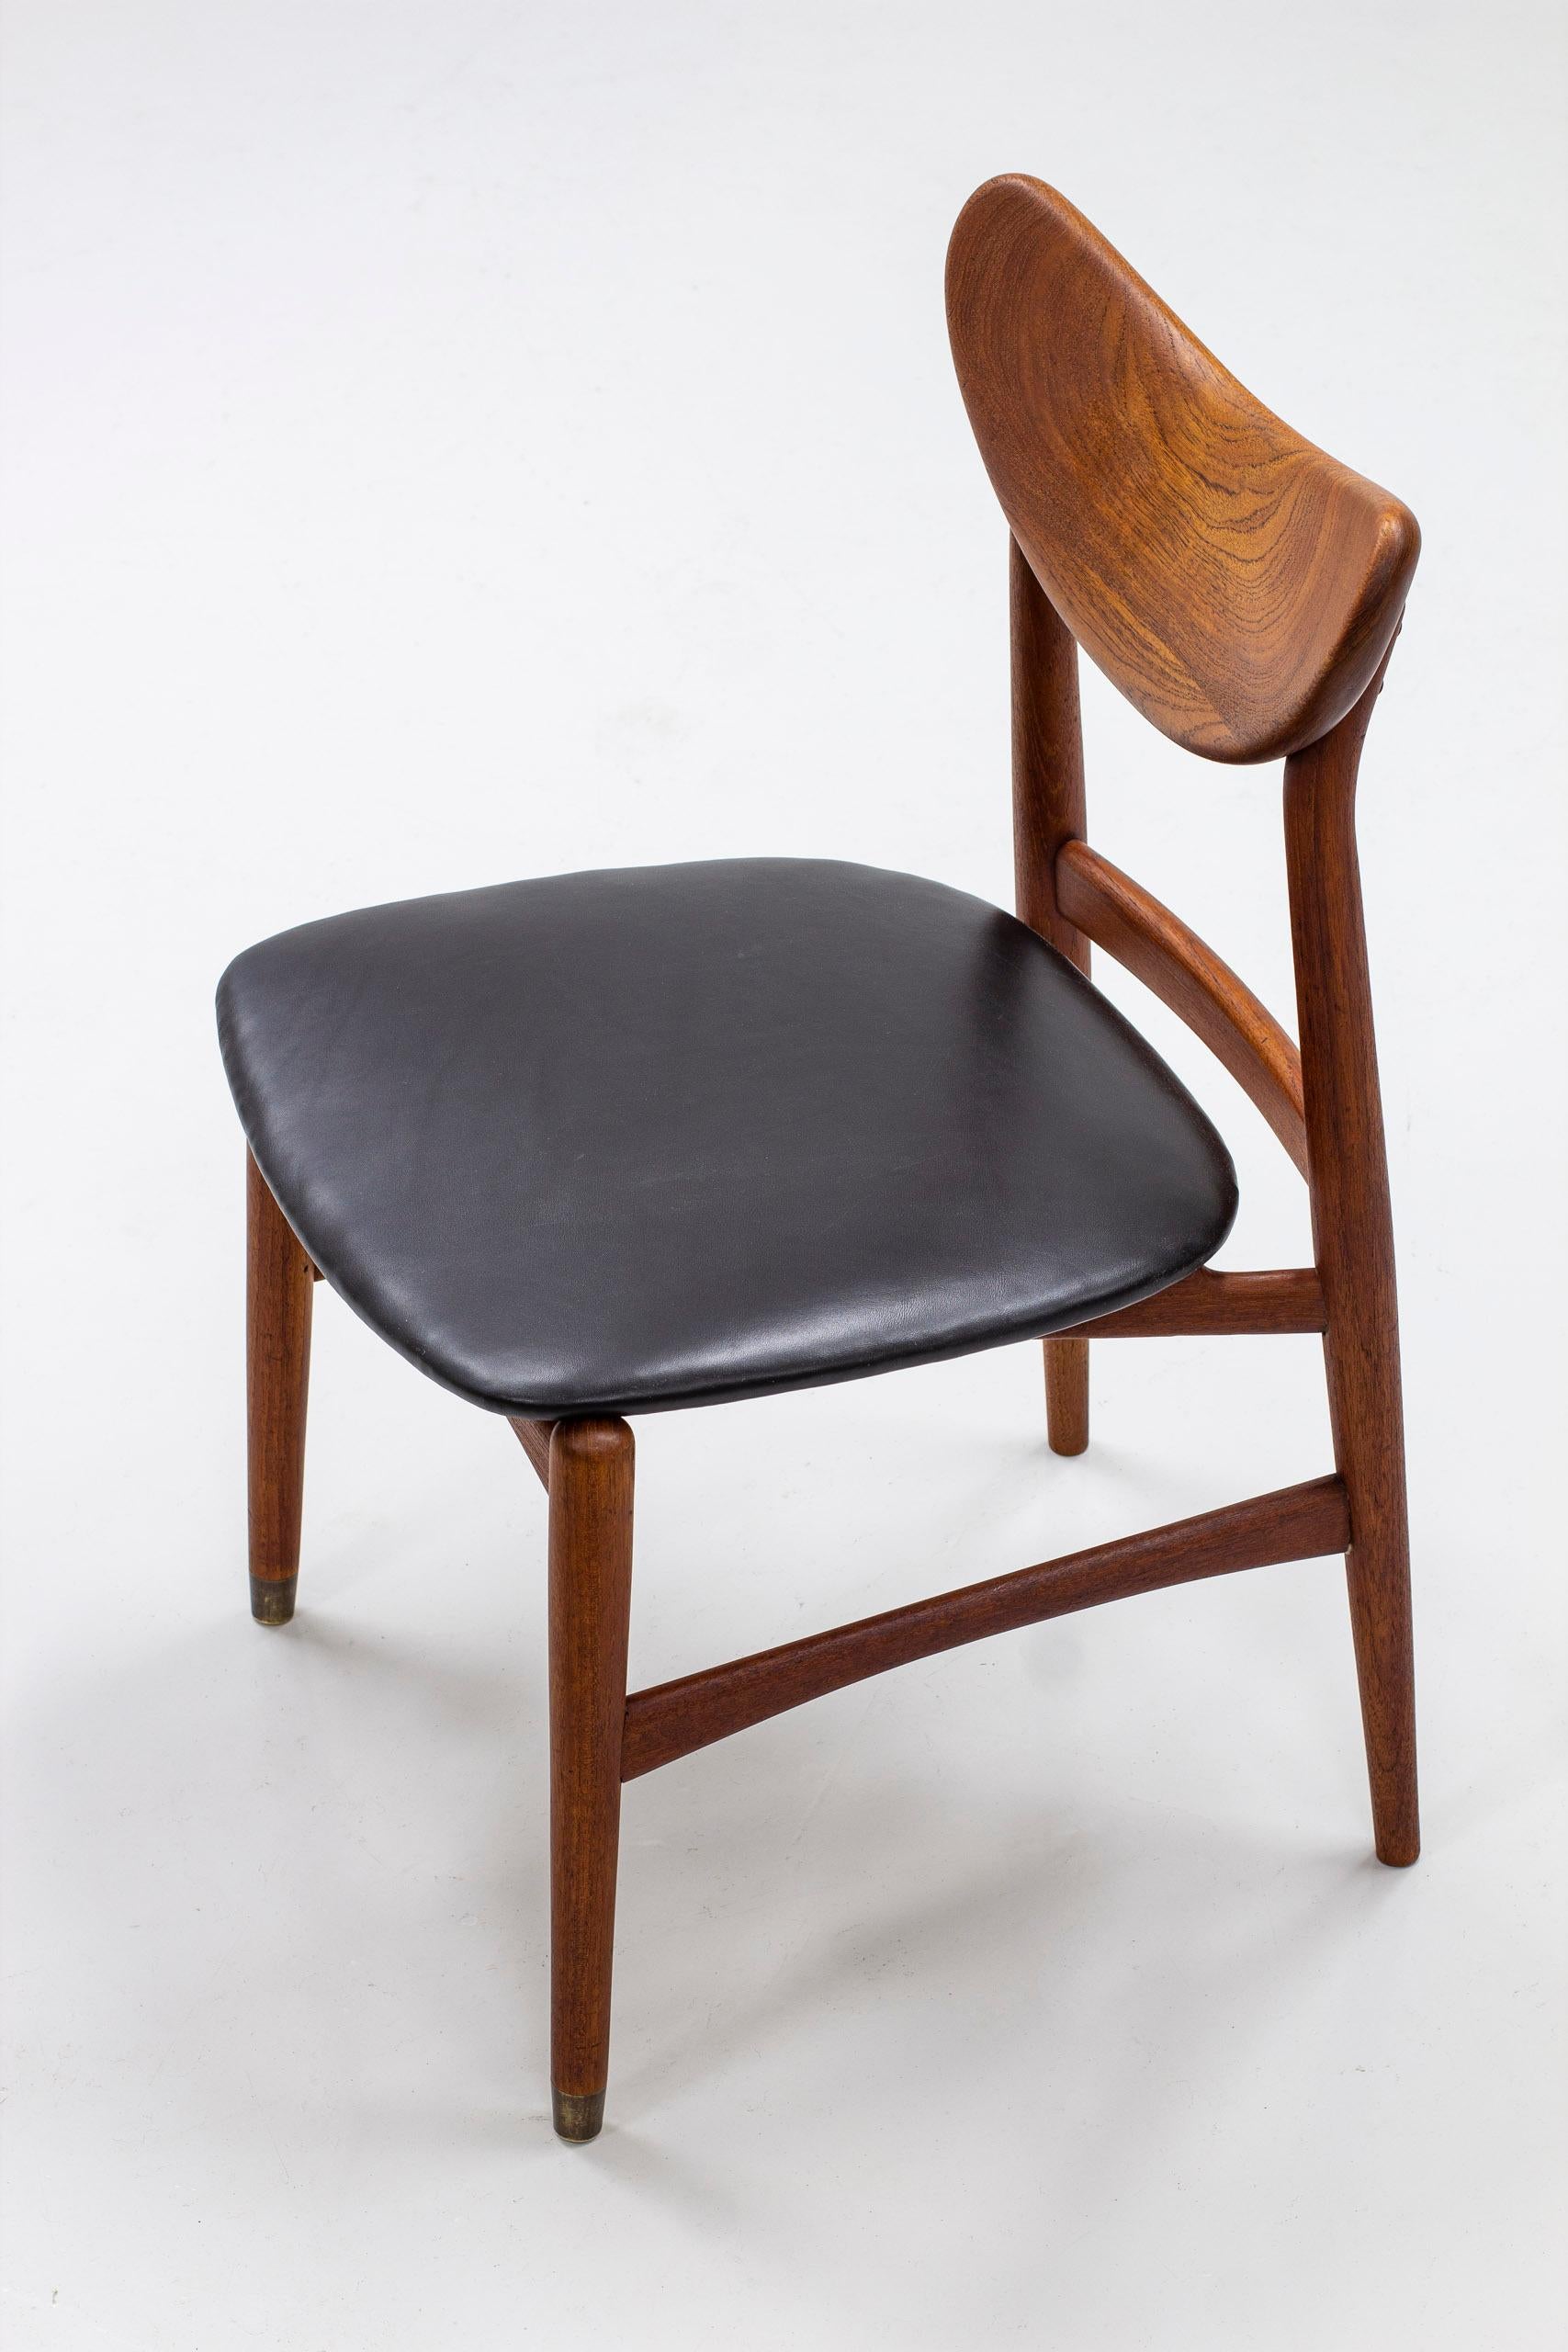 Side chair designed and made by cabinetmaker Oluf Jensen. Made in Denmark during the 1950s. Made from solid teak with a sculptural teak backrest. Seat reupholstered in black leather. Front legs finished off with brass feet. Good vintage condition